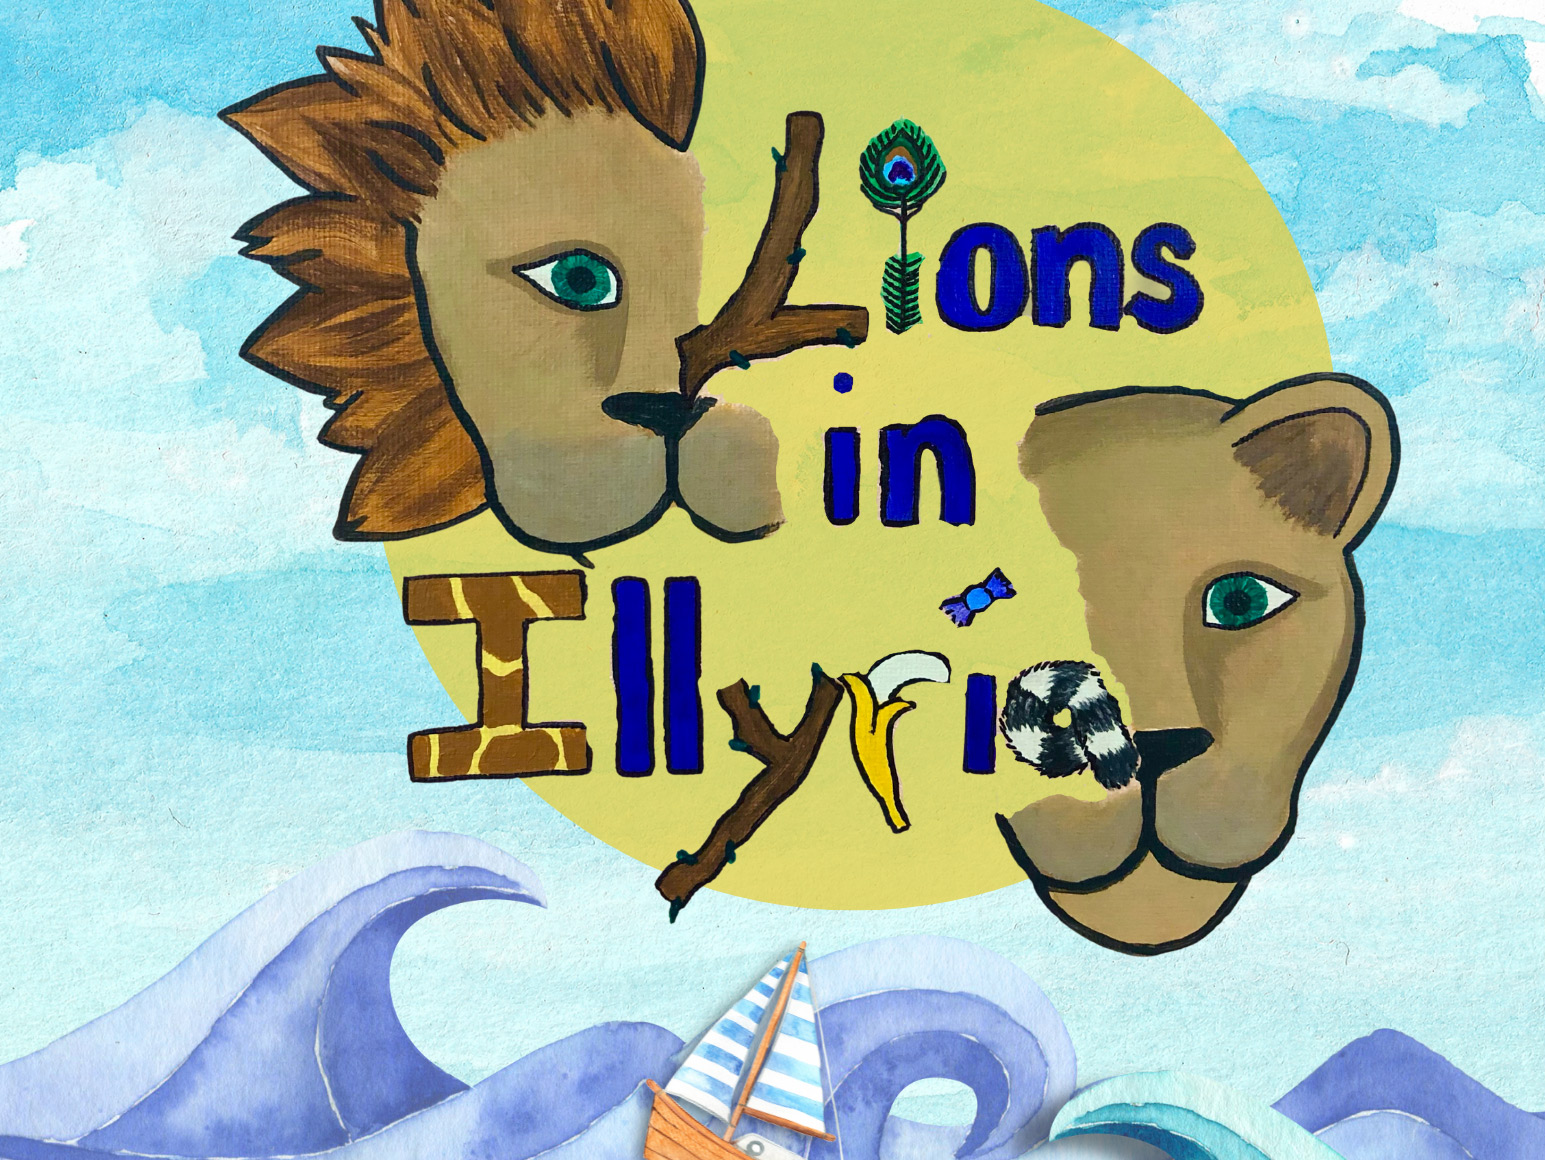 Lions in Illyria poster with drawing of a male and female lion heads over a yellow sun above an ocean